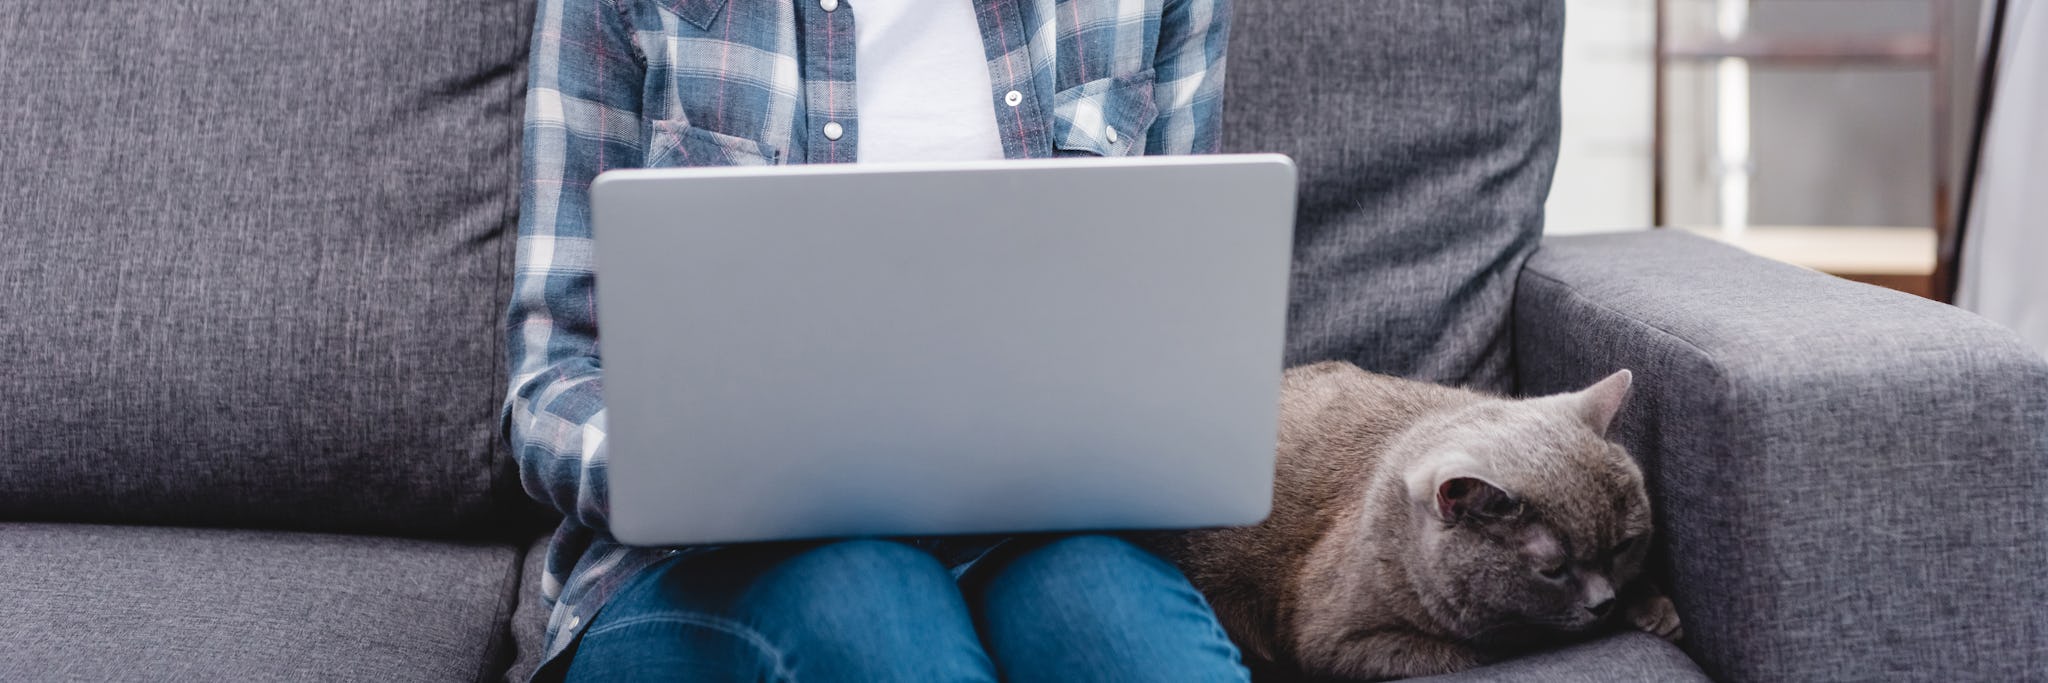 Woman using her computer on a couch with her cat next to her